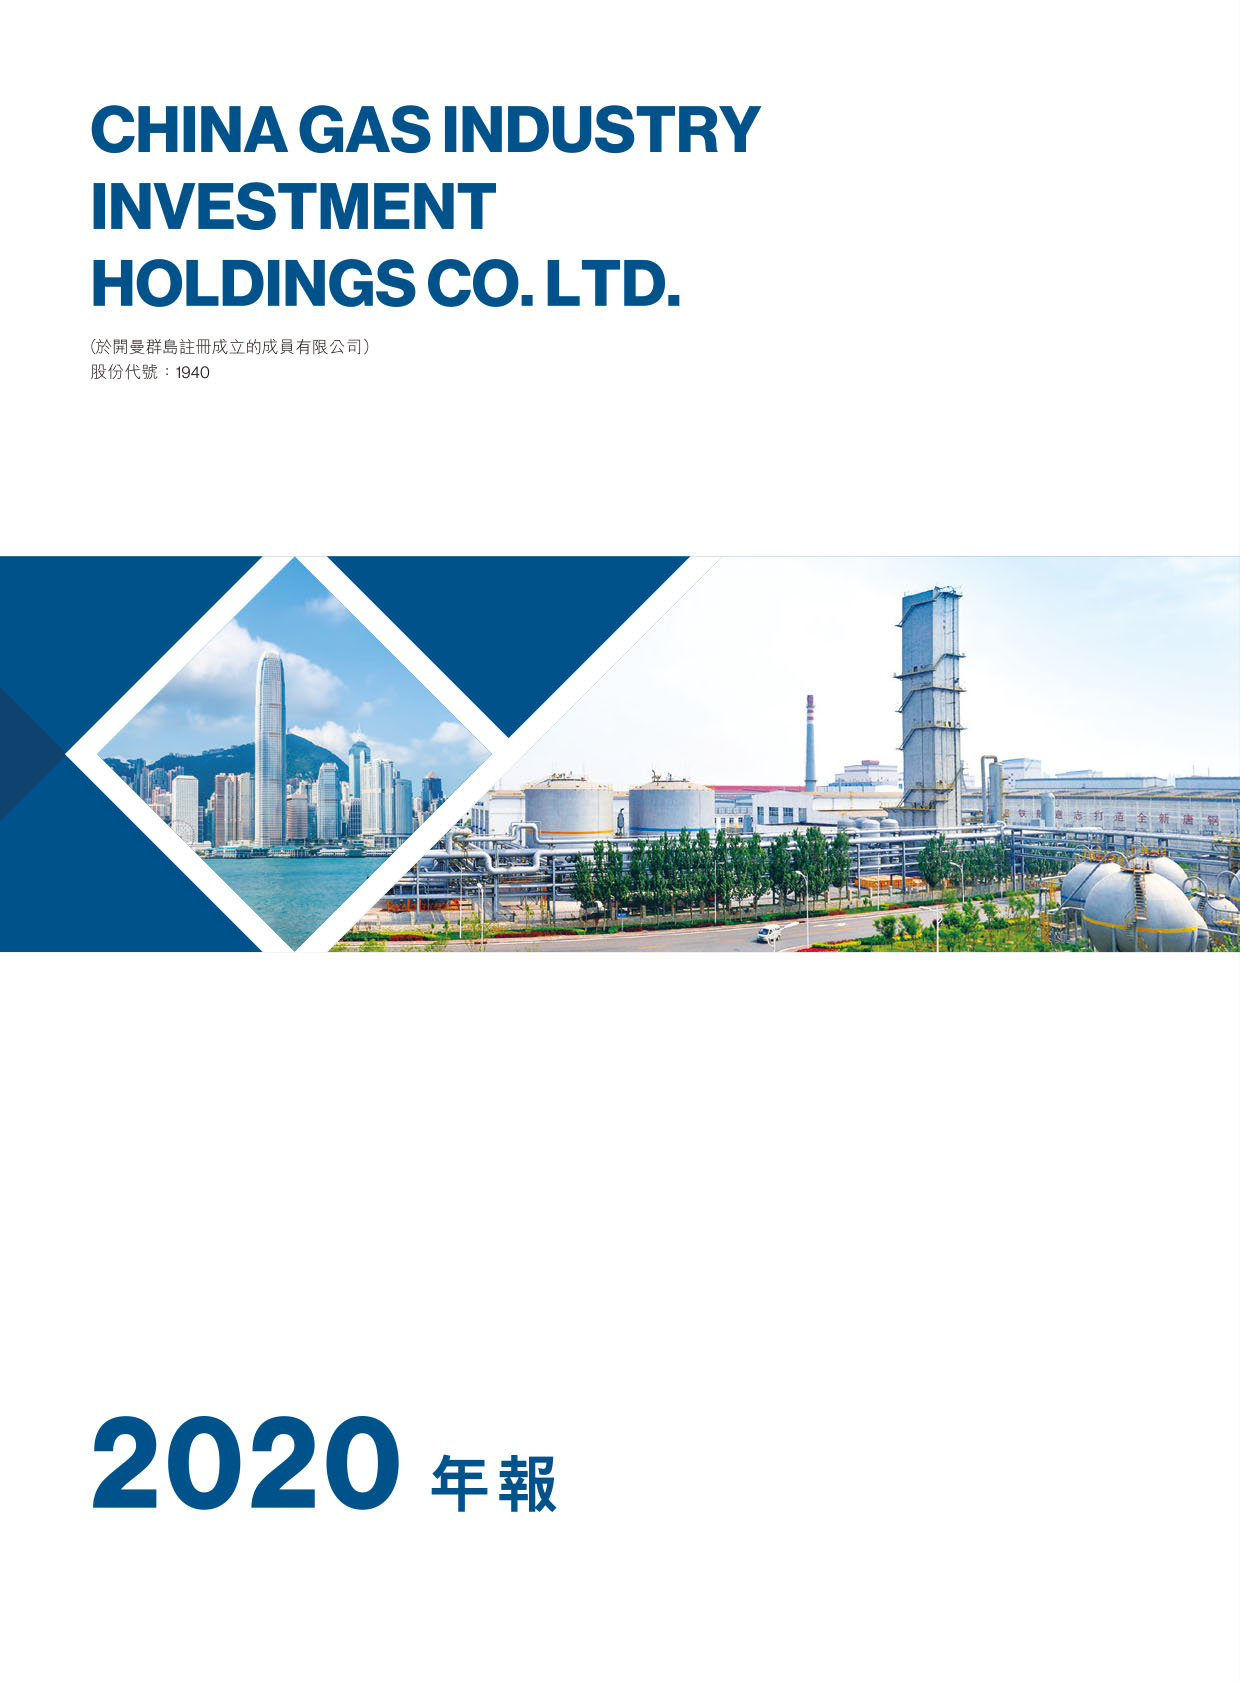 CHINA GAS INDUSTRY INVESTMENT HOLDINGS CO. LTD.